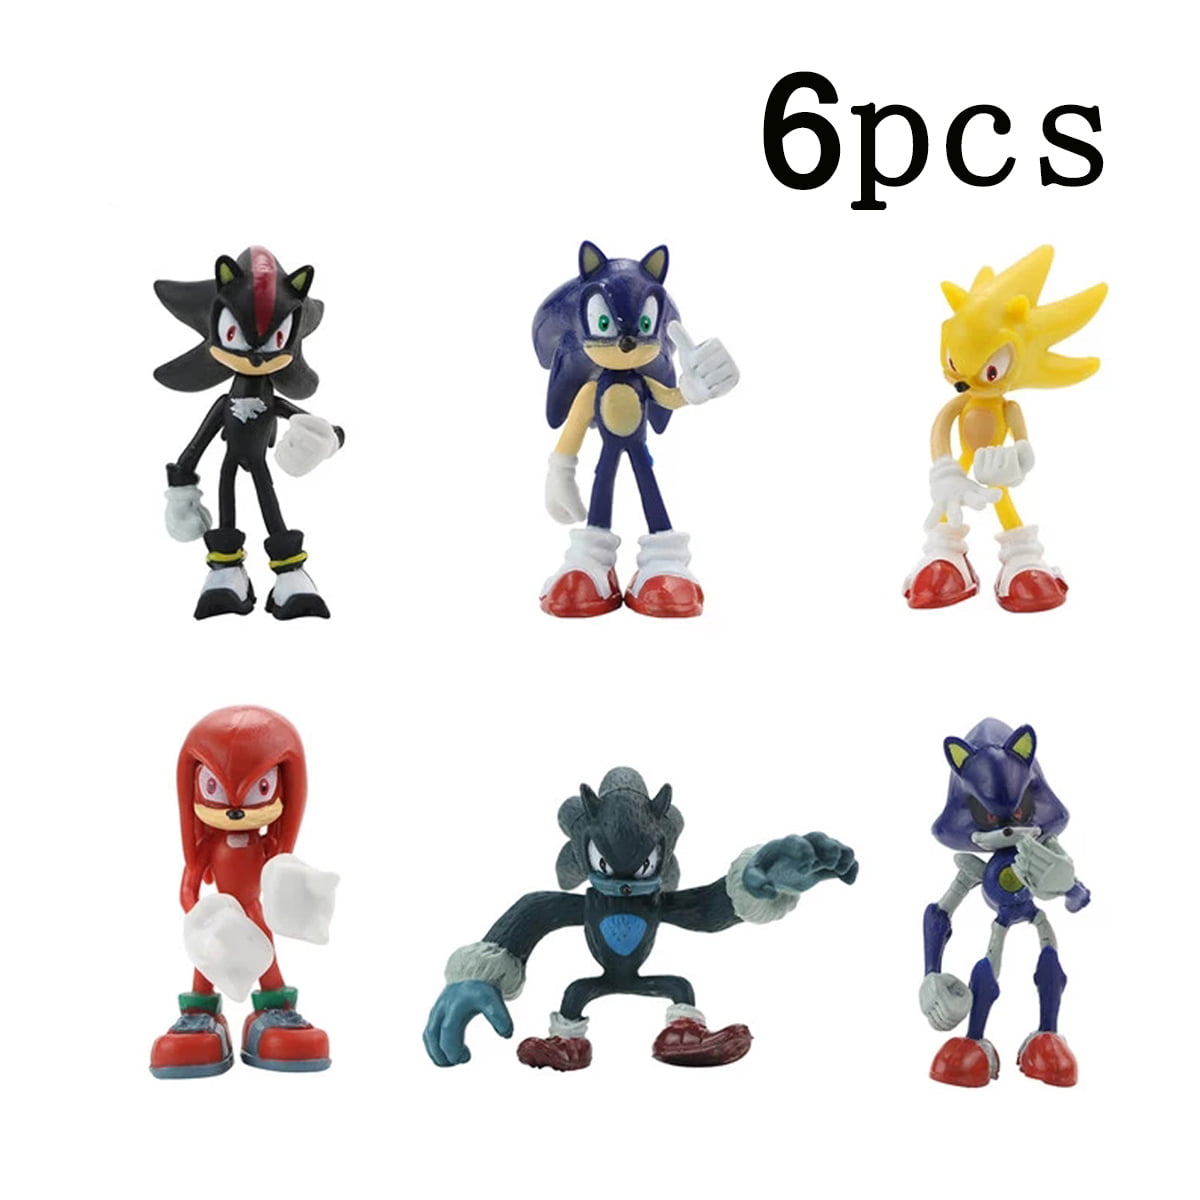 Sonic Hedgehog Action Figures Toys Set of 6 PCS 4 inch Super Sonic Tails Amy Rose Dr Eggman Knuckles The Echidna Toys Cake Toppers Decorations Collection Playset 